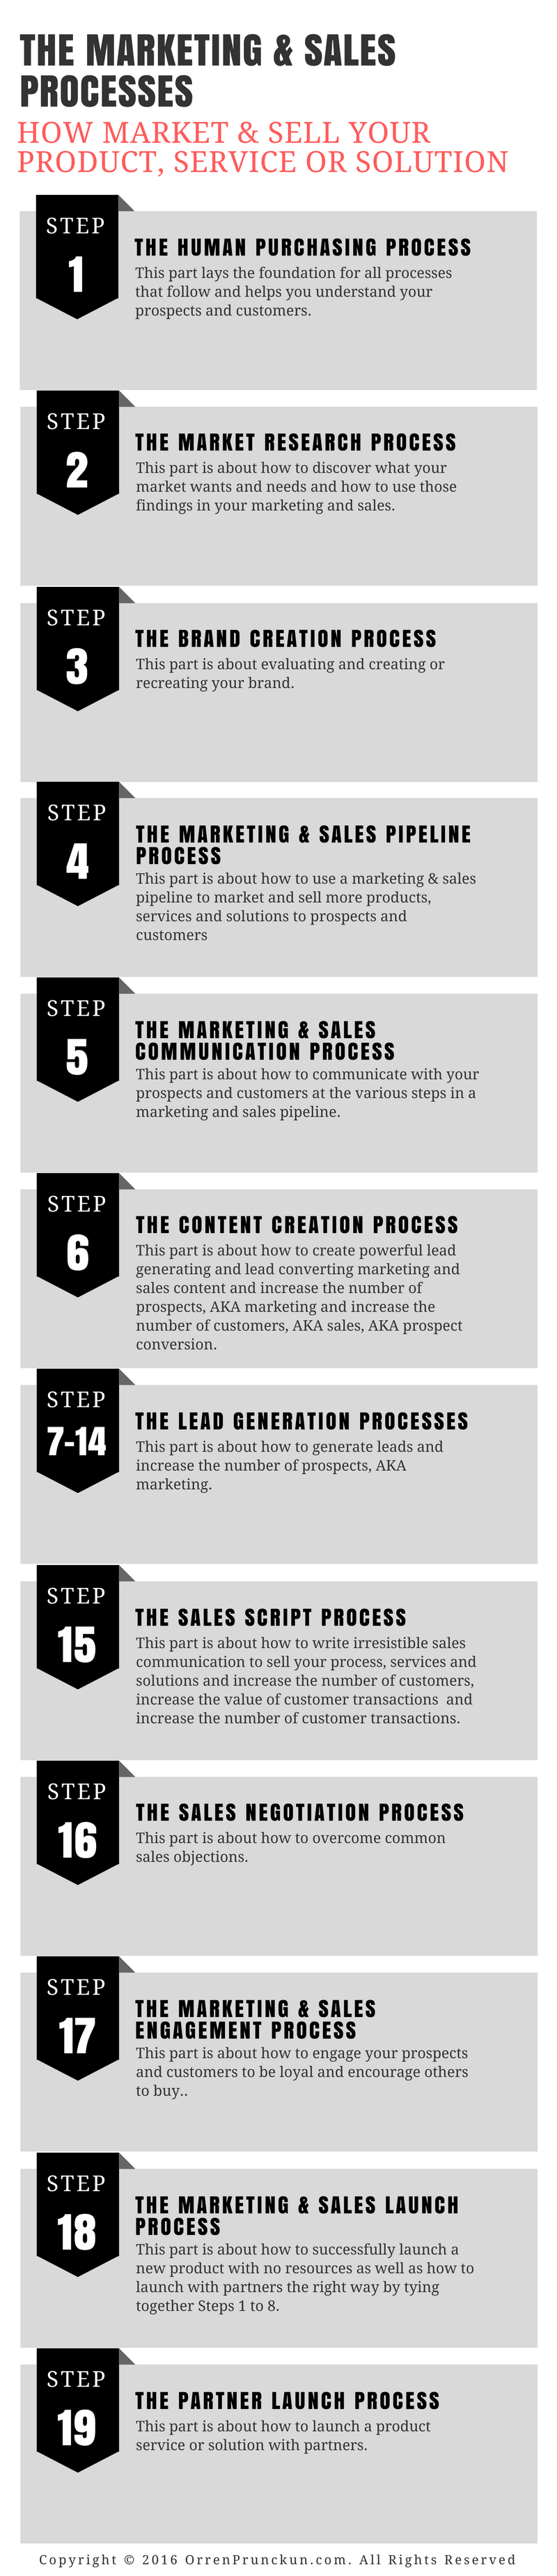 The Marketing & Sales Processes Infographic